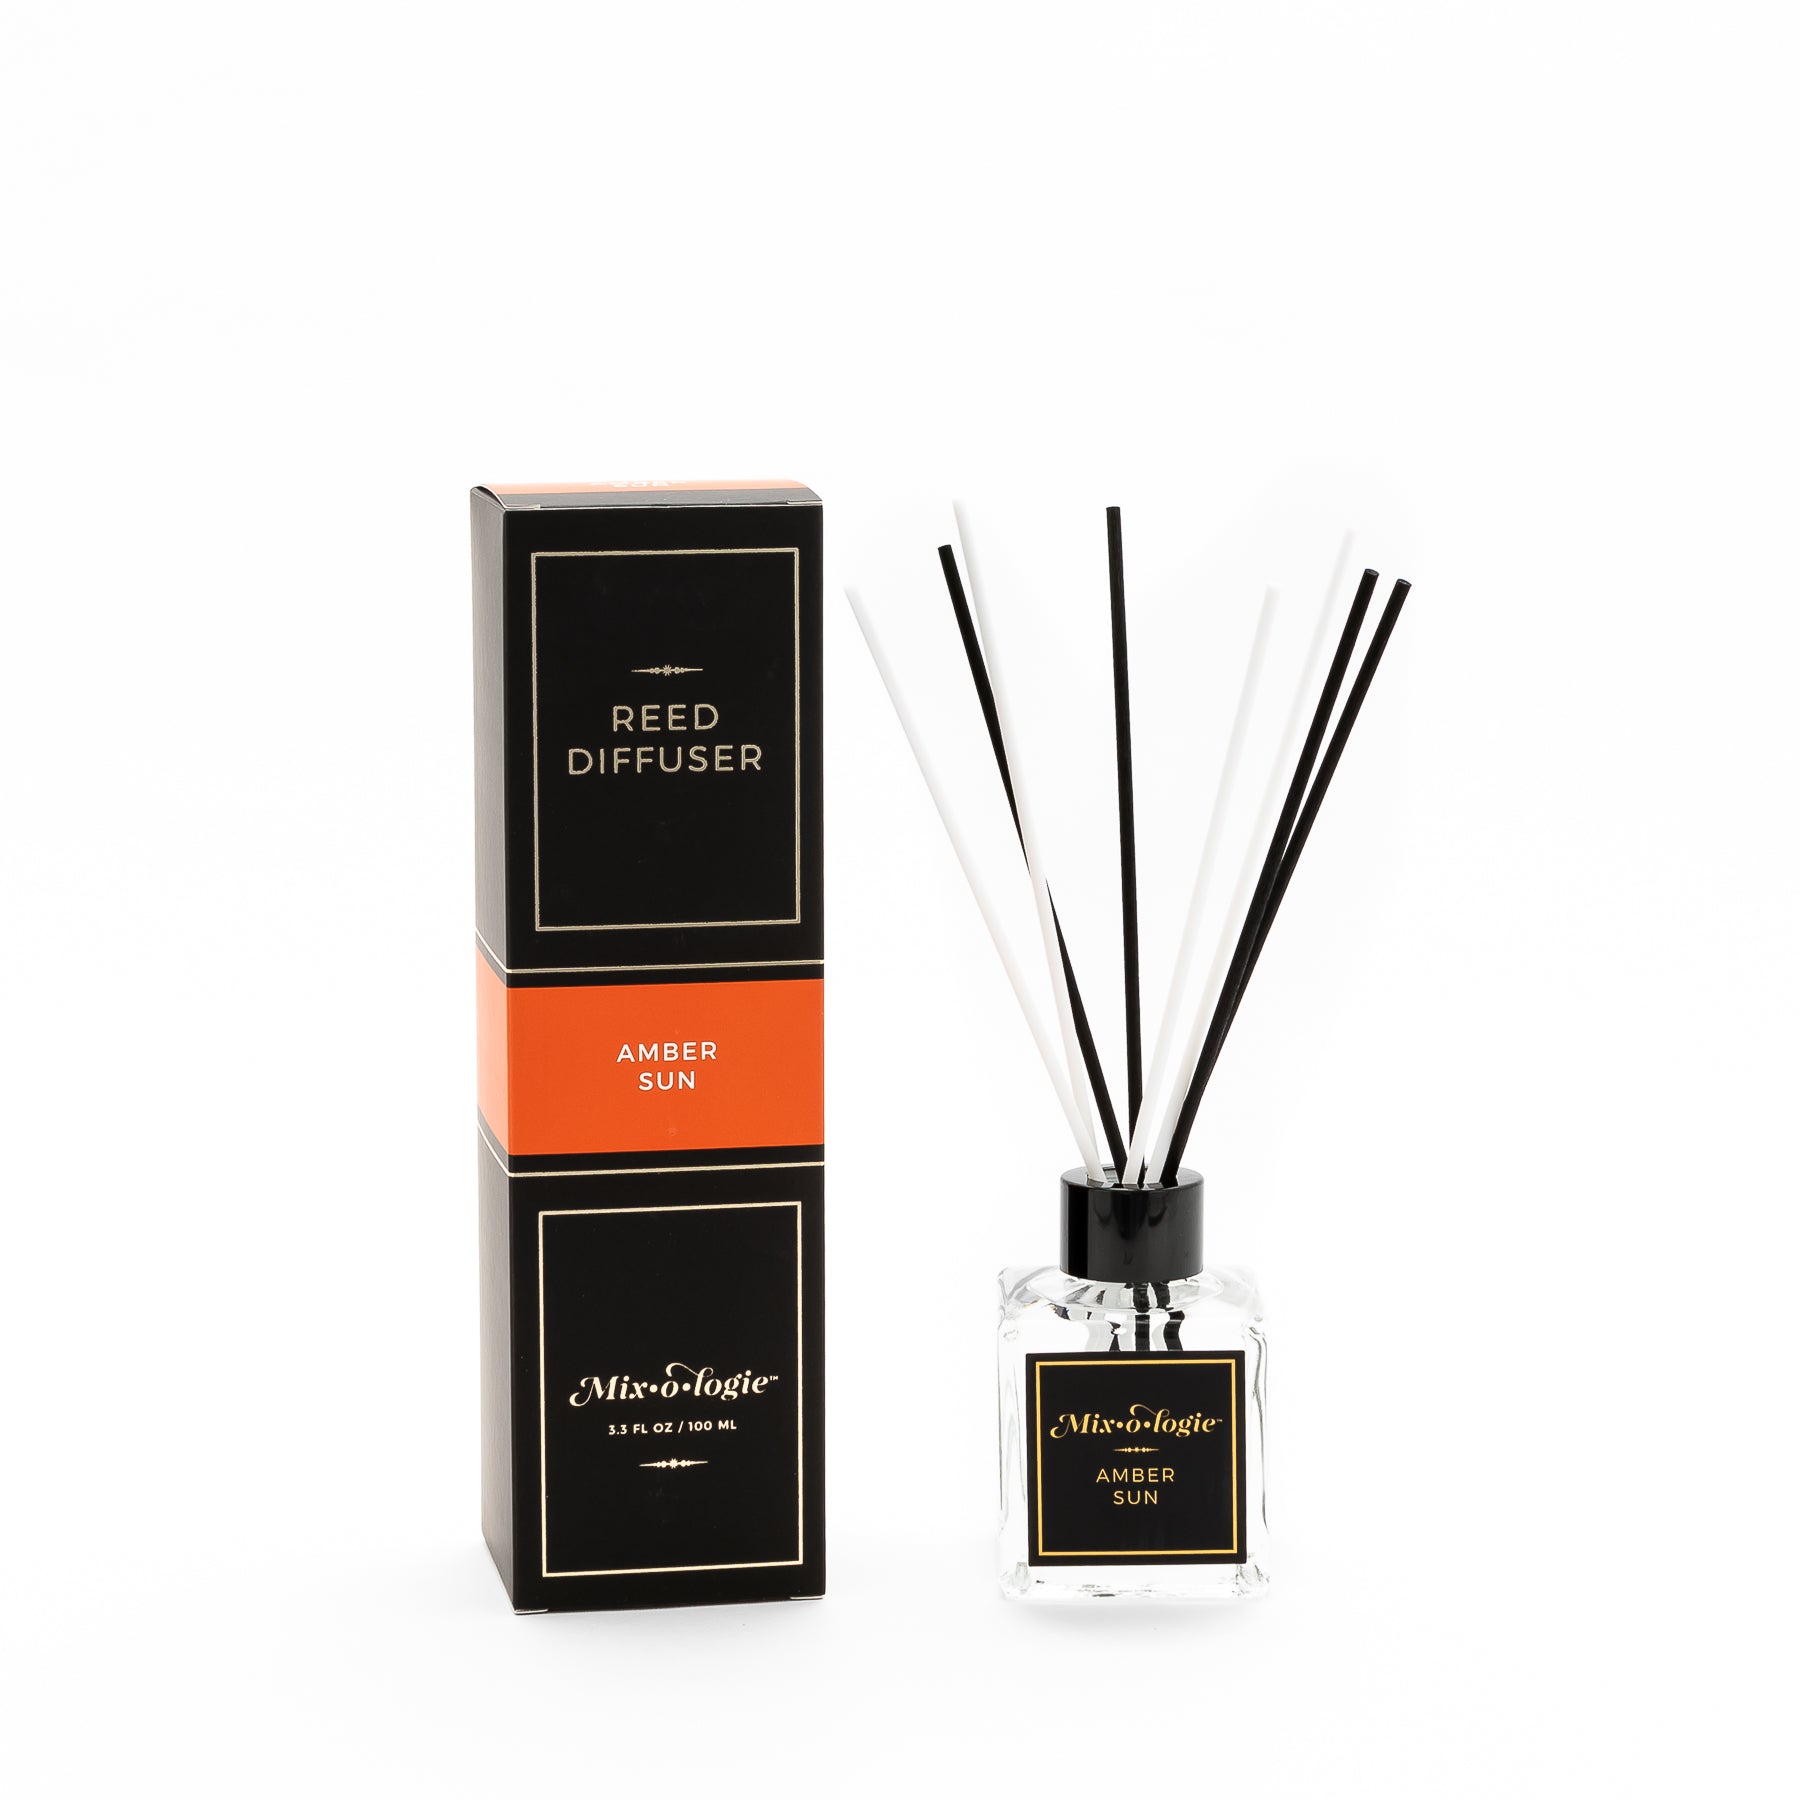 Amber Sun Reed Diffuser is a clear square glass container with black label that says Mixologie – Amber Sun. Has a black top and 4 white & 4 black reed sticks coming out of top, is 3.3 fl oz or 100 mL of clear scented liquid. Black rectangle package box with orange label. Box and diffuser are pictured with white background